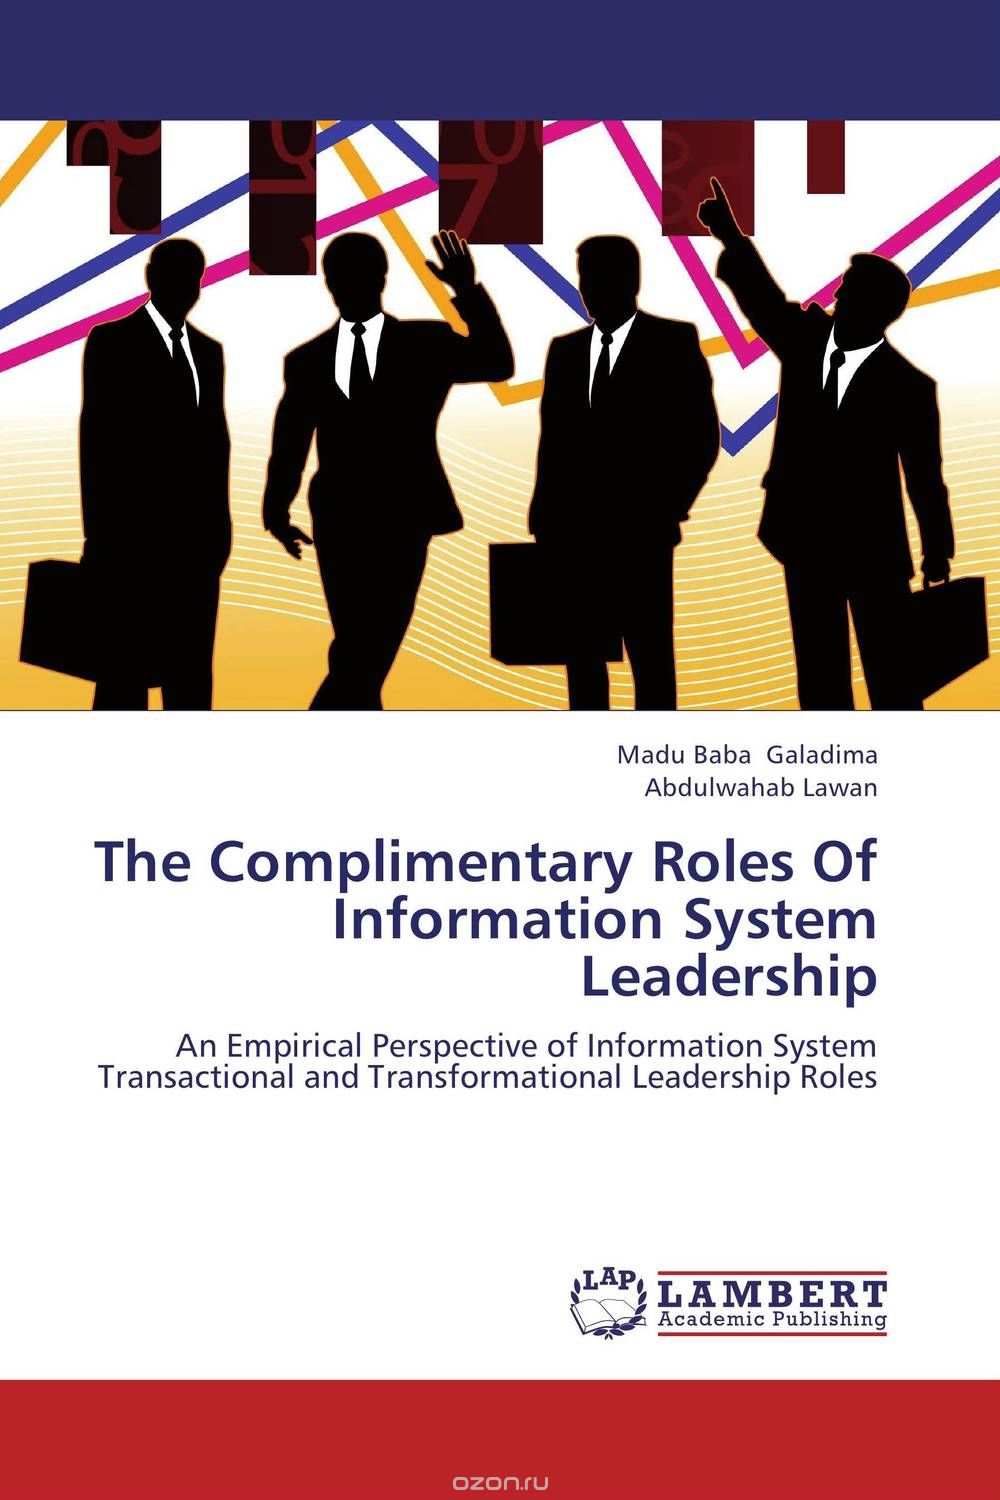 The Complimentary Roles Of Information System Leadership